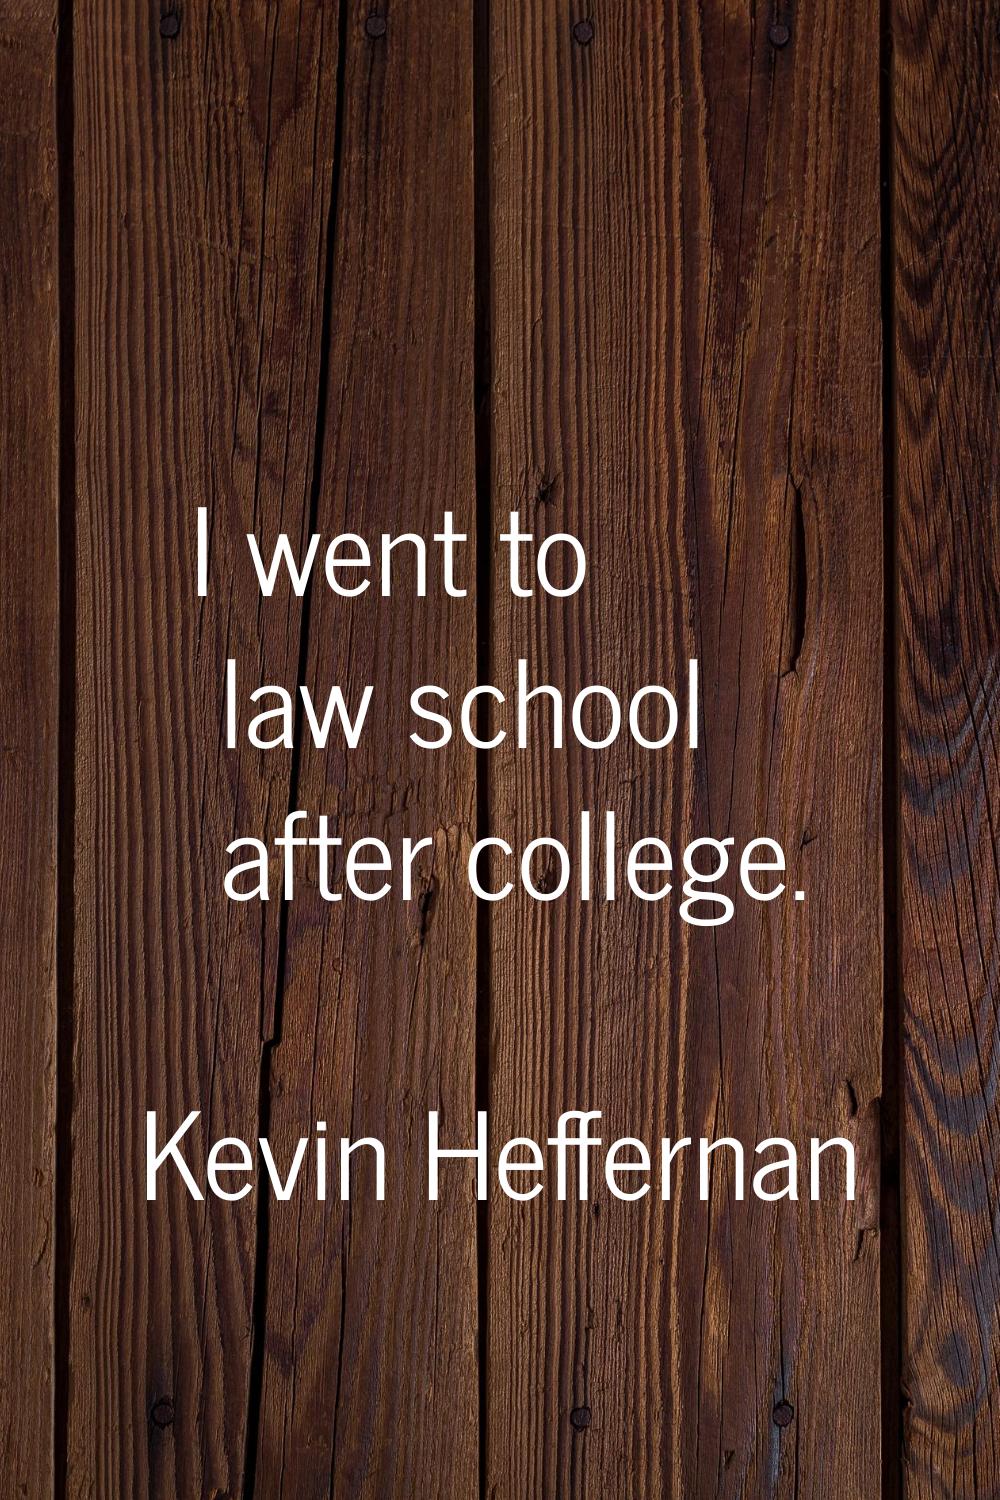 I went to law school after college.